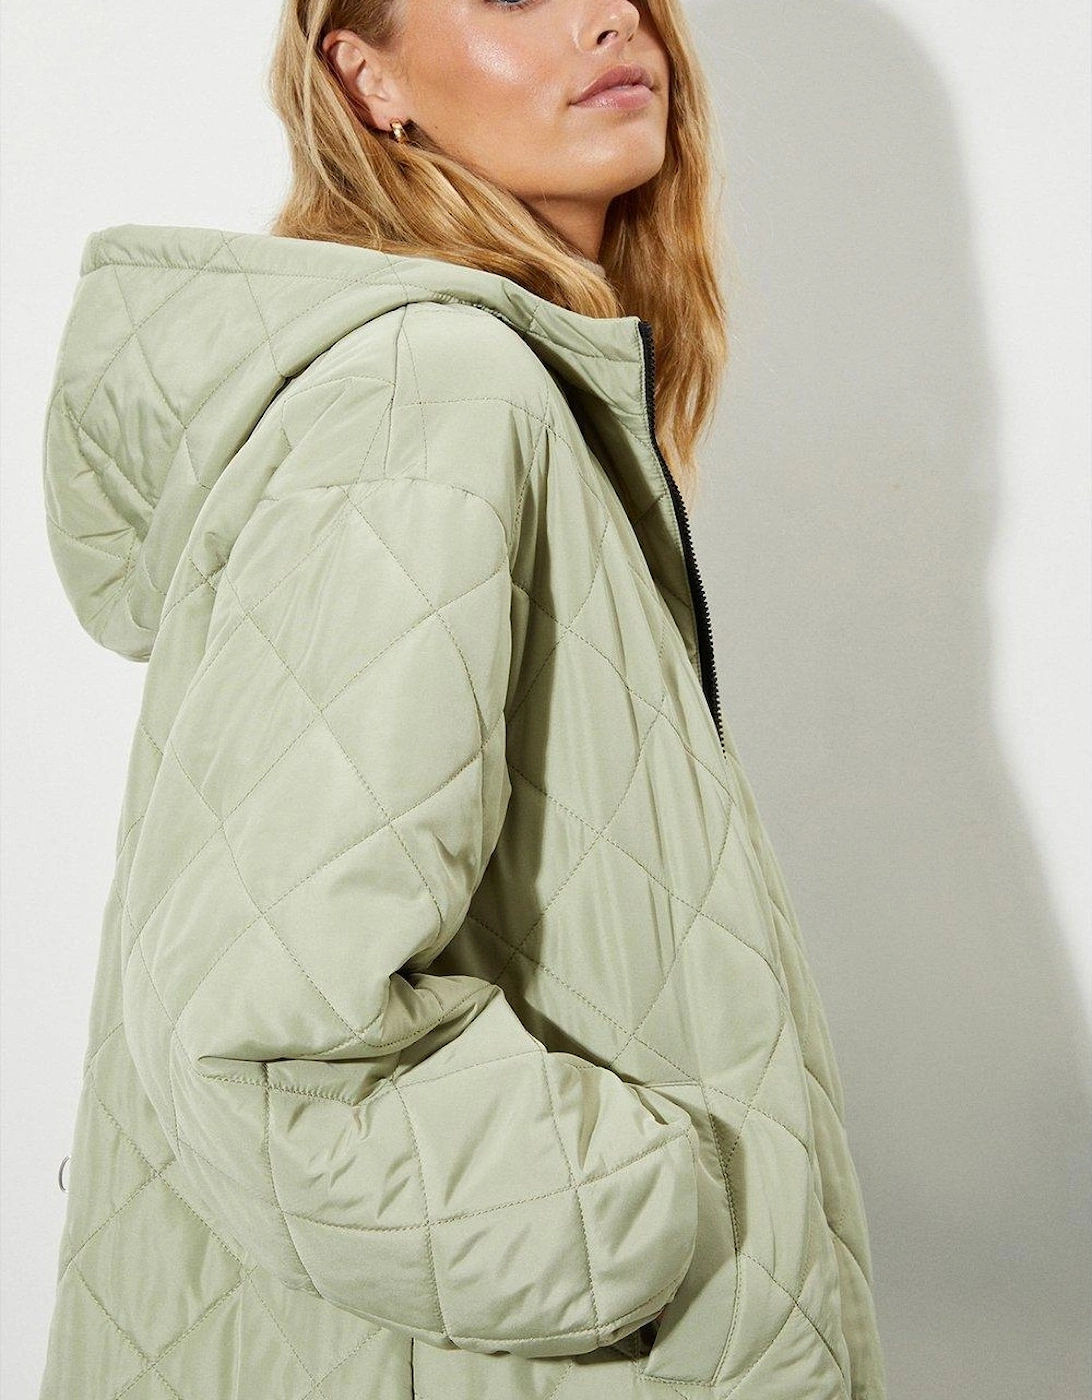 Womens/Ladies Diamond Quilted Hooded Oversized Coat